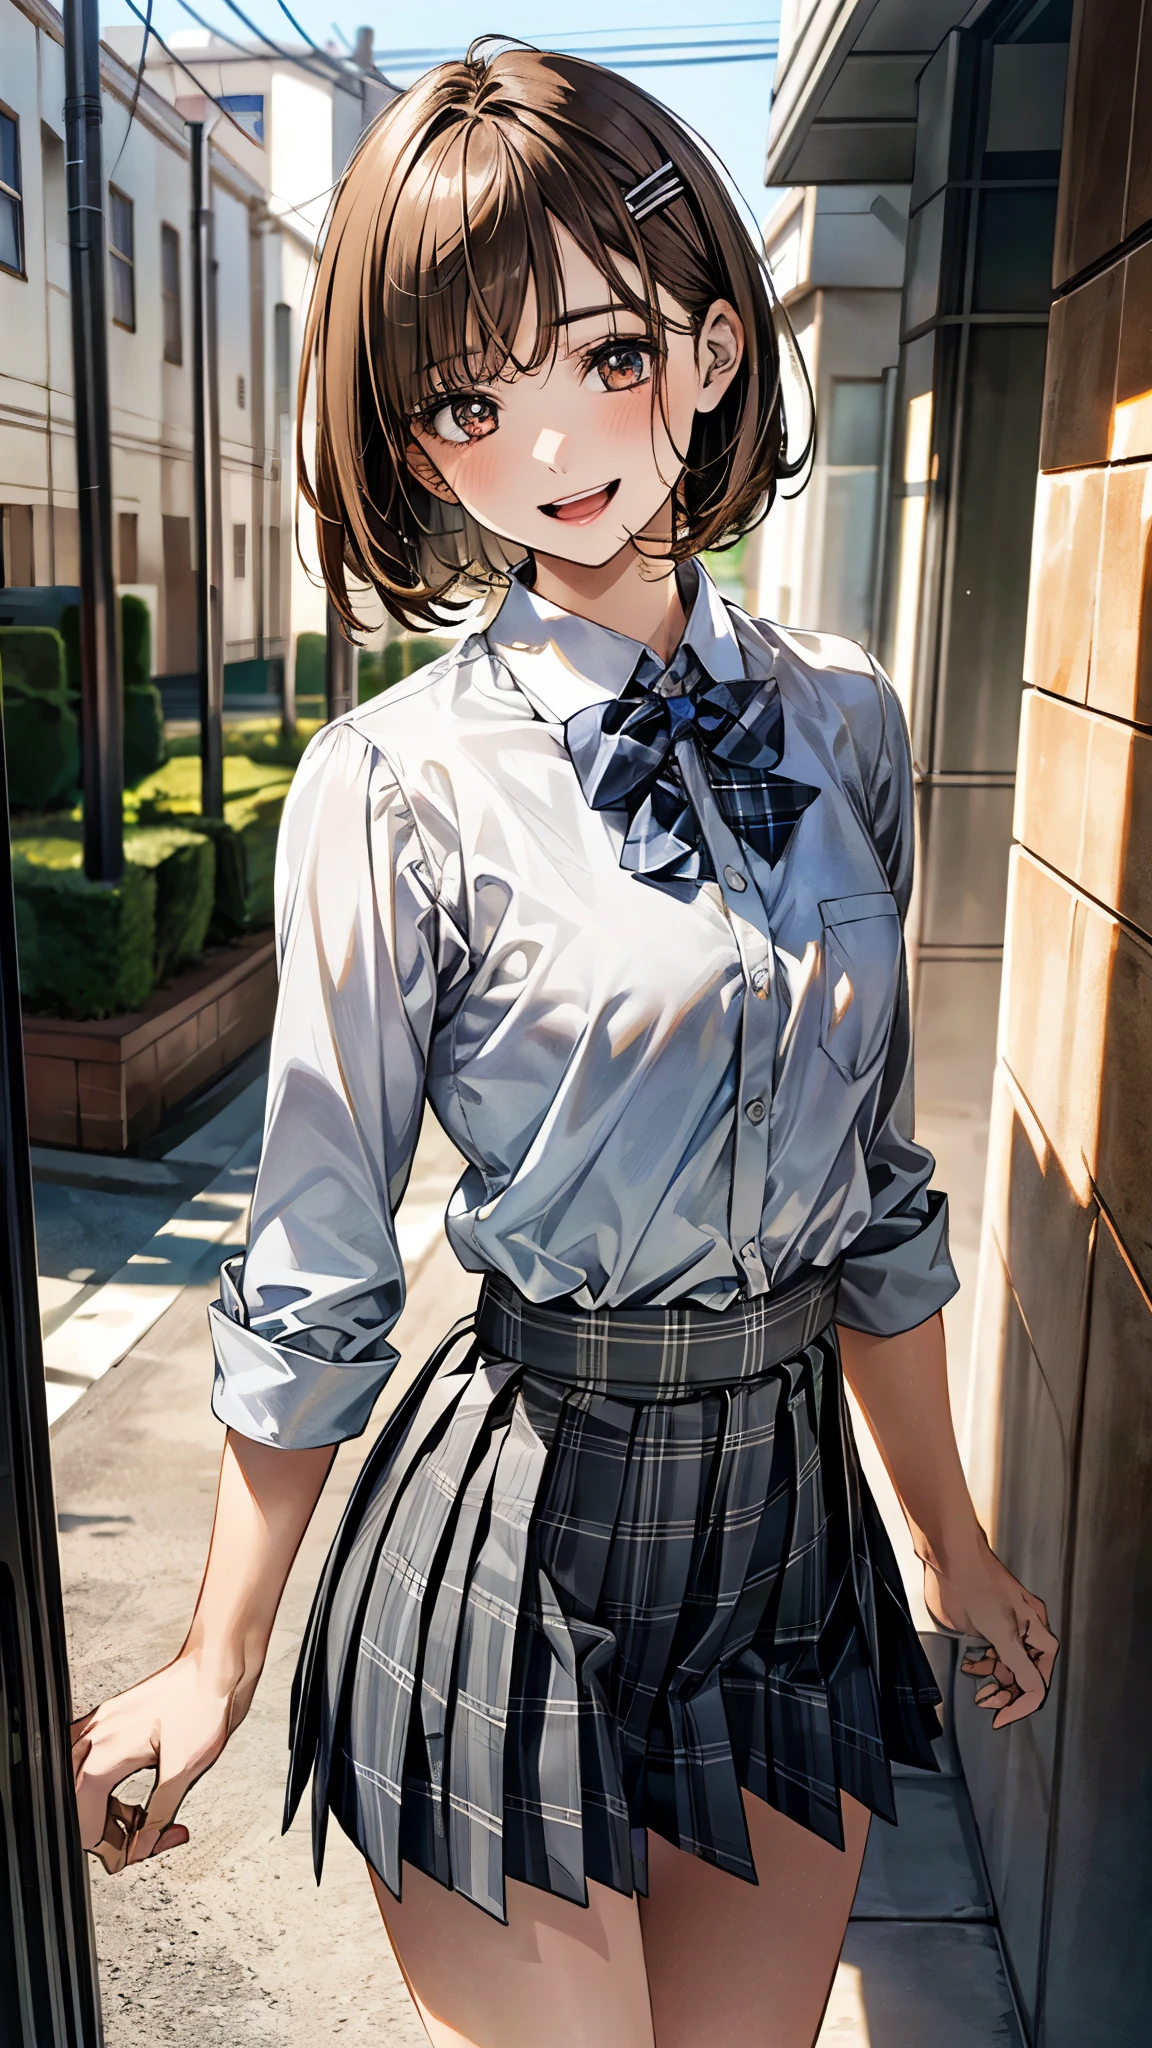 (masterpiece:1.2, top-quality), (realistic, photorealistic:1.4), beautiful illustration, (natural side lighting, movie lighting), , 
looking at viewer, full body, 1 girl, high school girl, japanese, perfect face, perfect anatomy, cute and symmetrical face, small face, round face, shiny skin, 
(short hair:1.6, bob cut:1.5, orange brown hair), swept bangs, long horizontal bangs, hair clips, red brown eyes, long eye lasher, (middle breasts), slender, 
beautiful hair, beautiful face, beautiful detailed eyes, beautiful clavicle, beautiful body, beautiful chest, beautiful thigh, beautiful legs, beautiful fingers, 
((symmetrical clothing, white collared shirts, gray pleated mini skirt), blue plaid bow tie), , 
(beautiful scenery), depth of field, morning, (outdoors), walking, (smile, open mouth), 